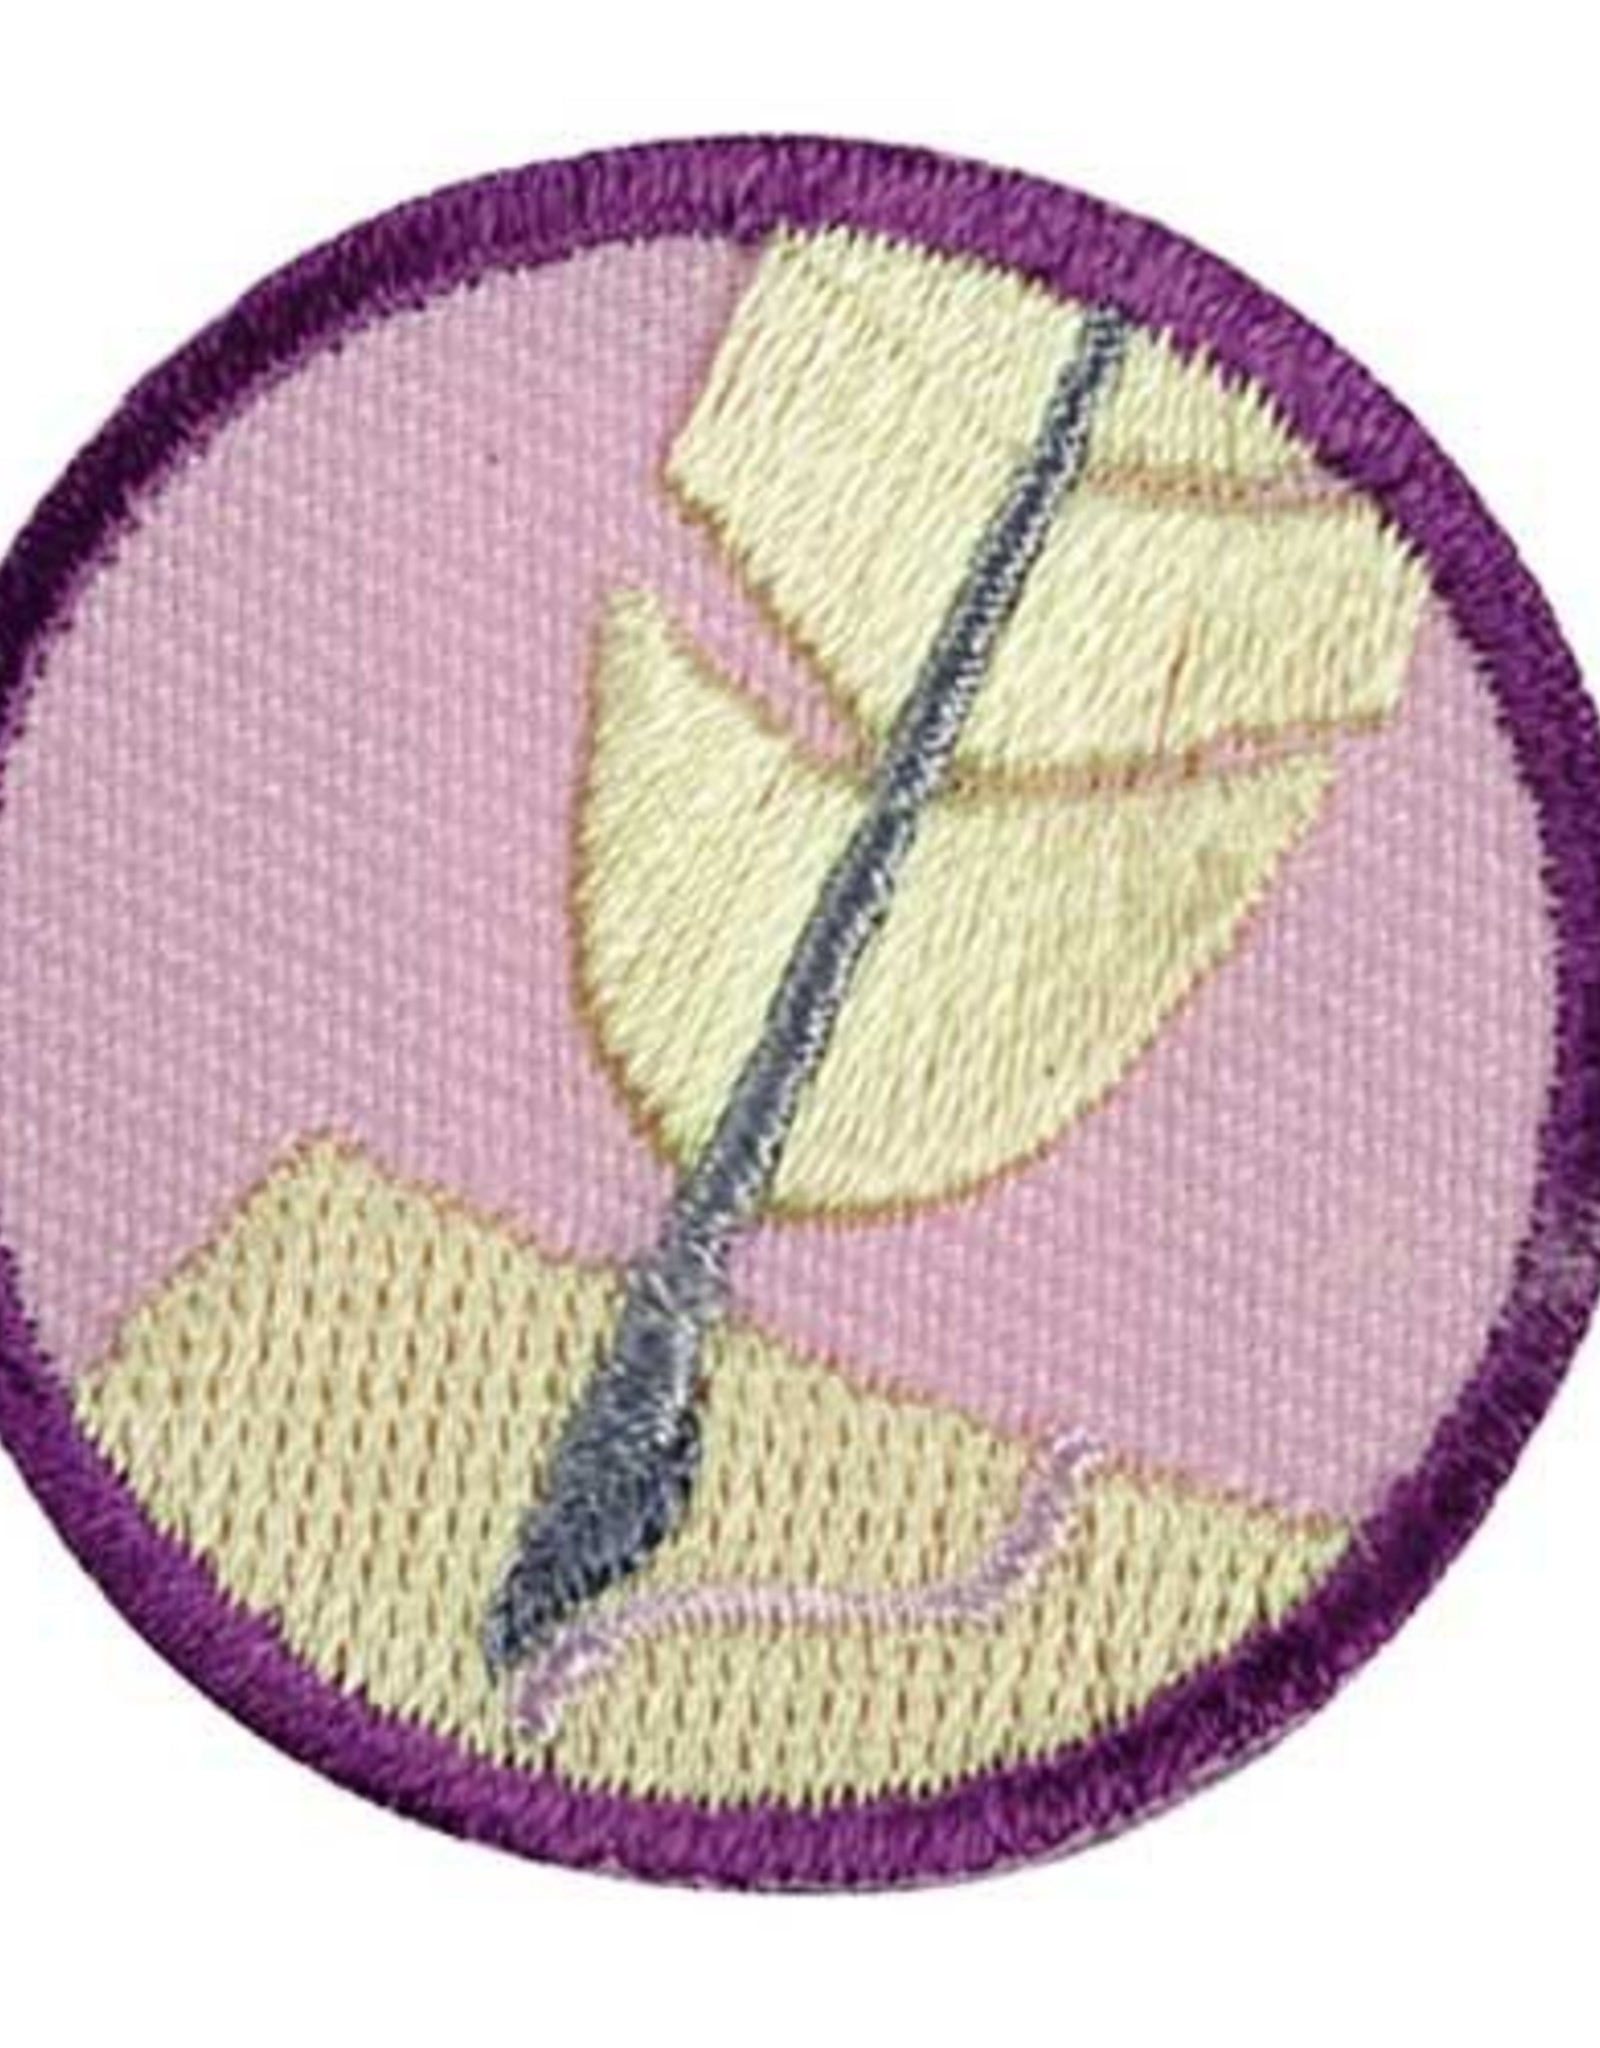 GIRL SCOUTS OF THE USA Junior Scribe Badge